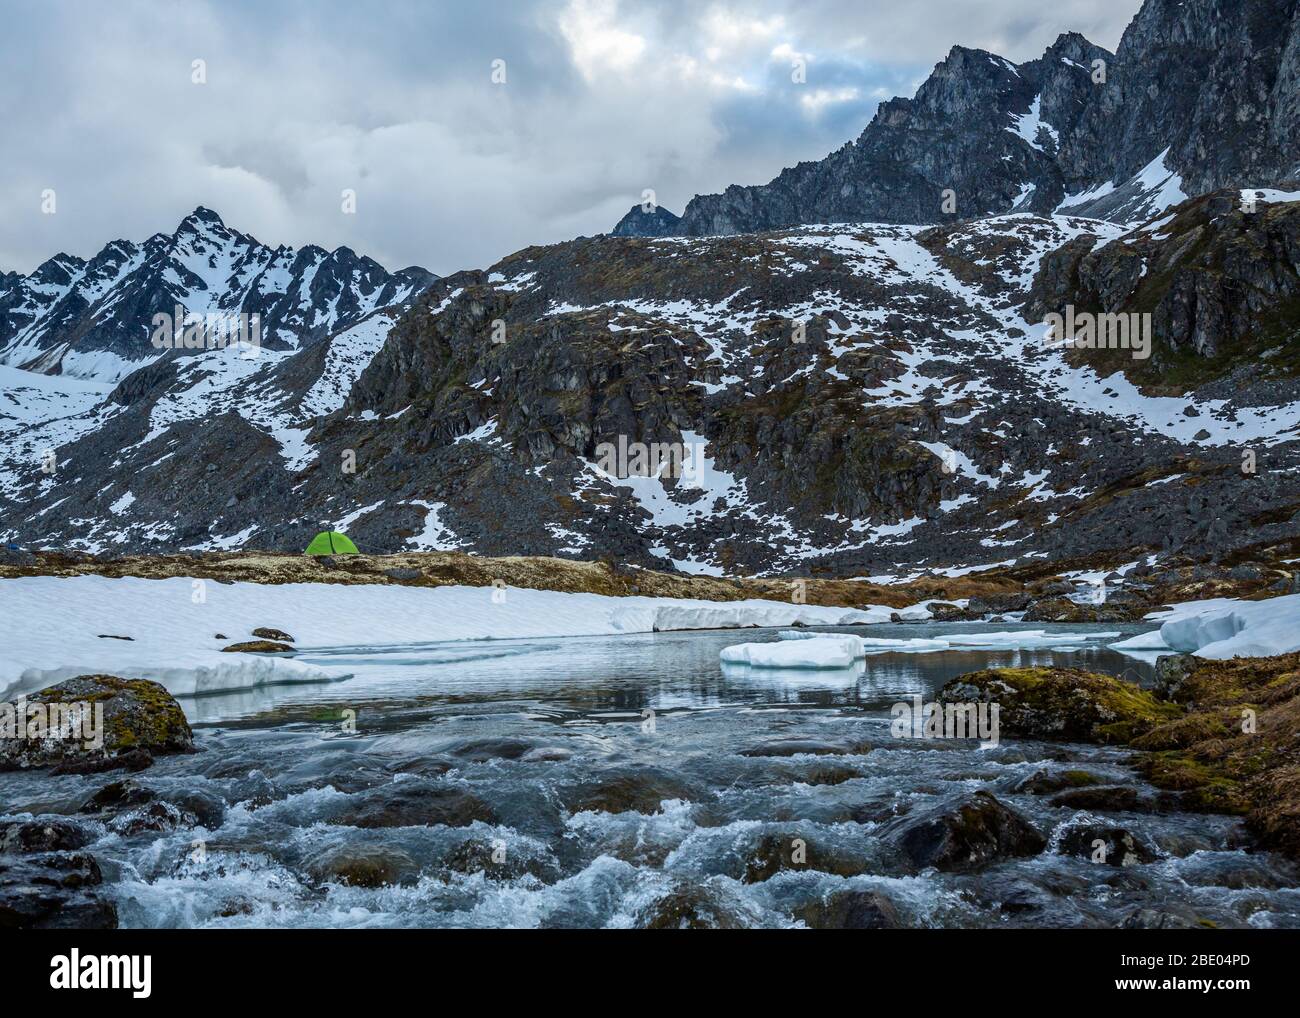 Camping overa frozen lake and waterfall below massive rocky peaks in the remote Alaskan wilderness of the Talkeetna Mountains. Stock Photo